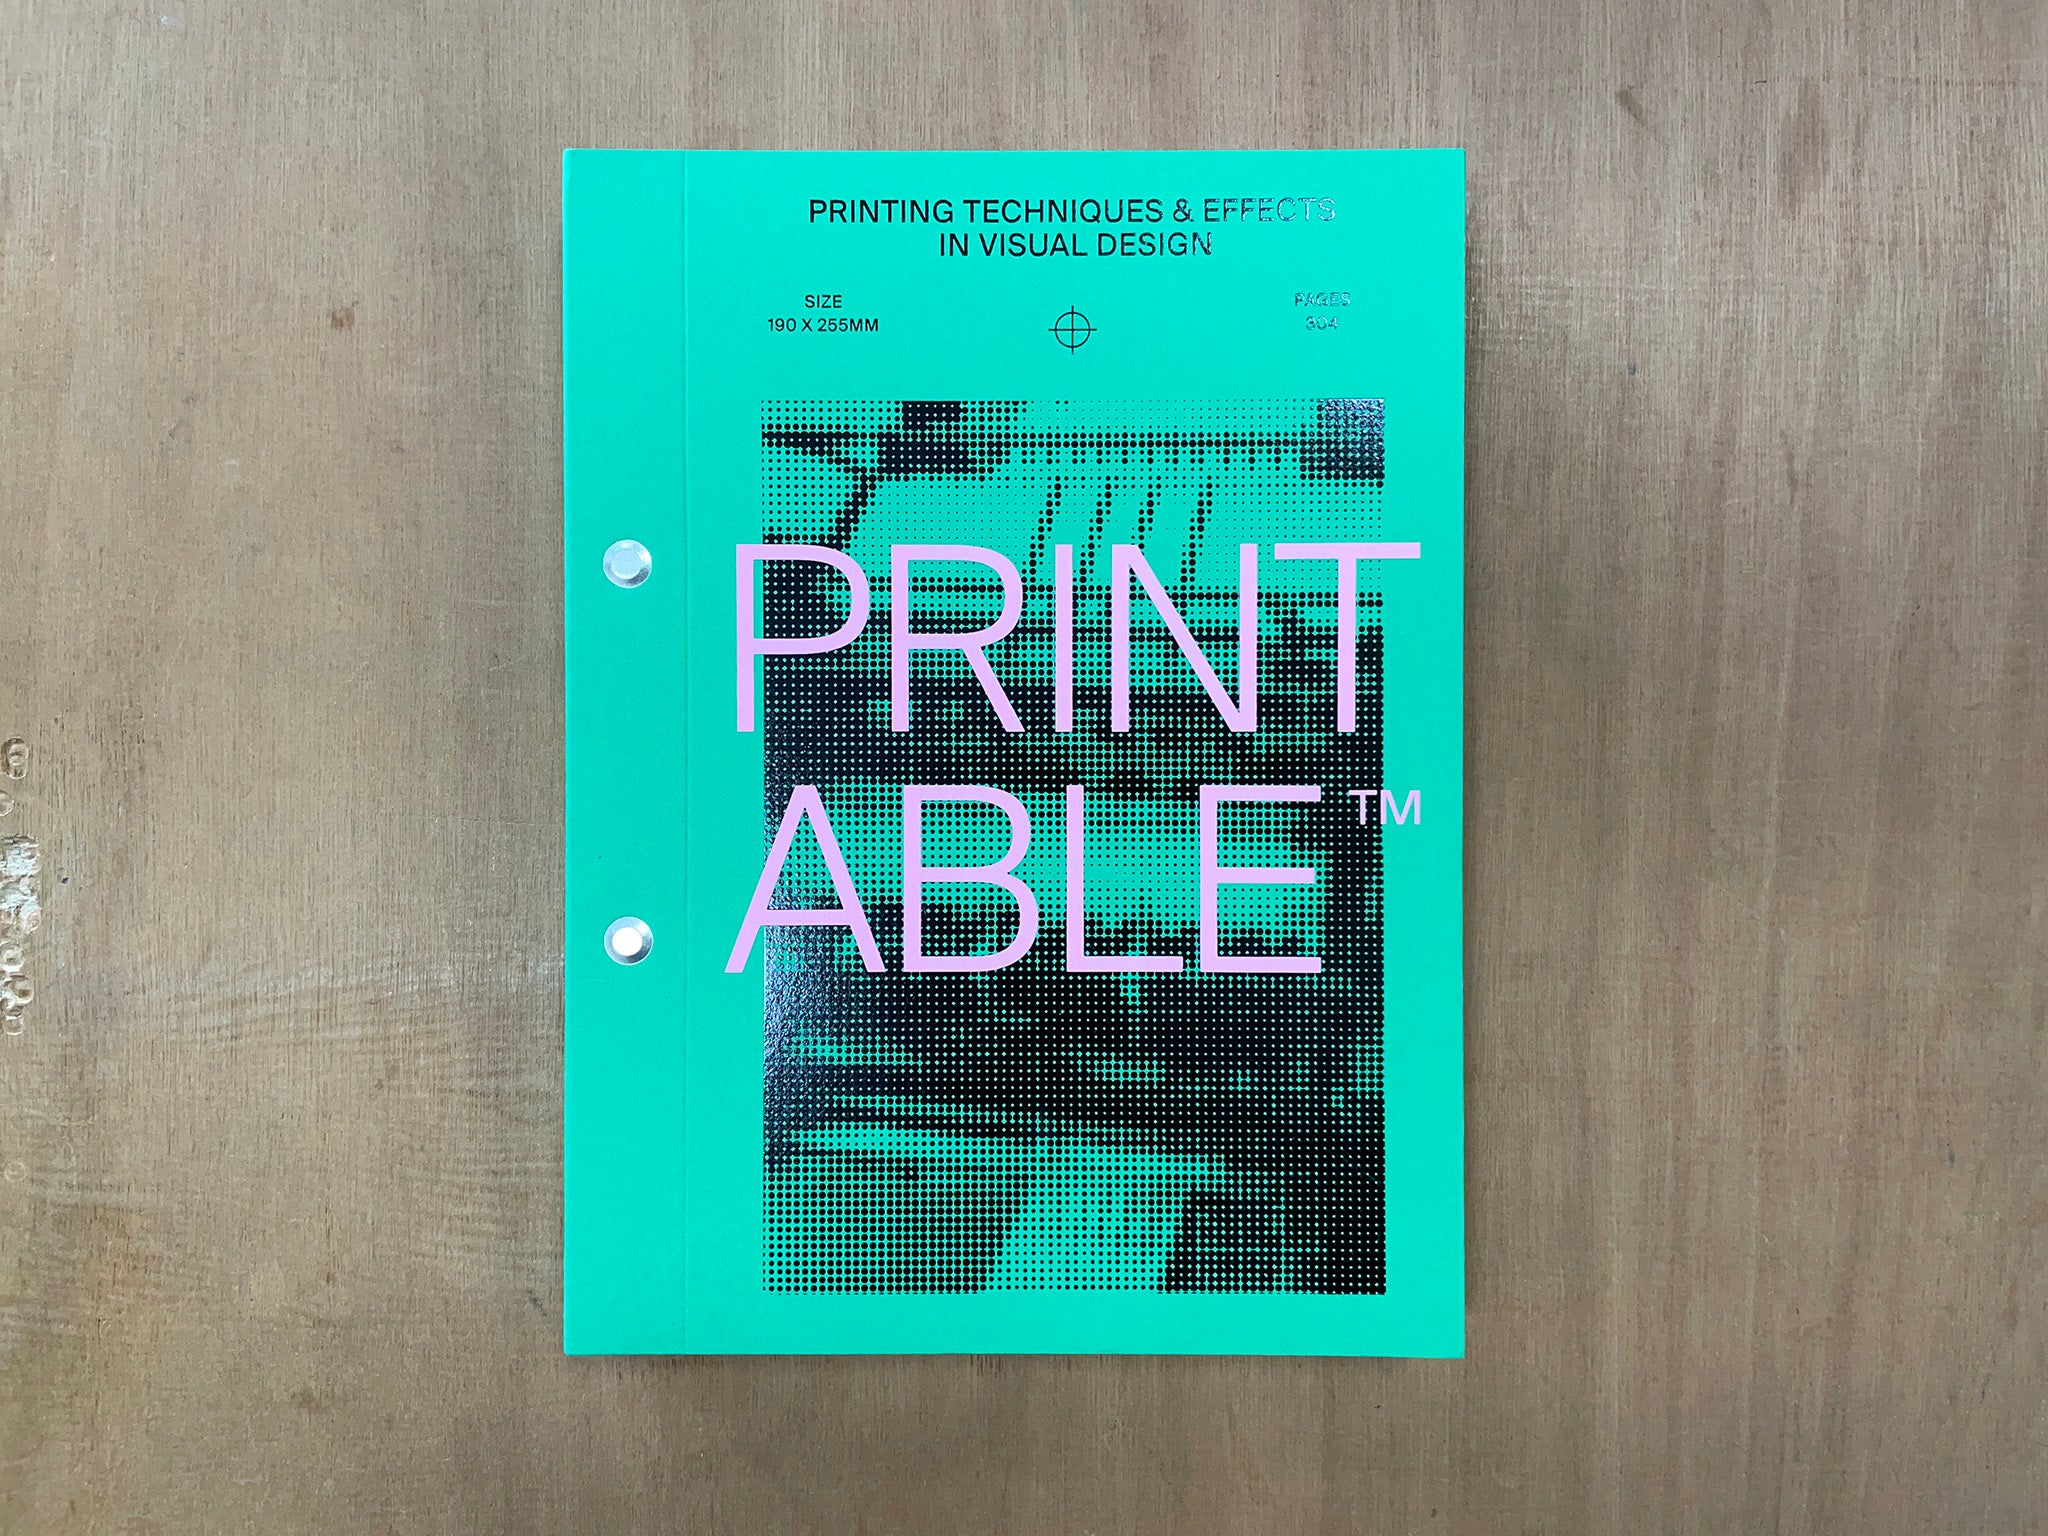 PRINTABLE: PRINTING TECHNIQUES AND EFFECTS IN VISUAL DESIGN